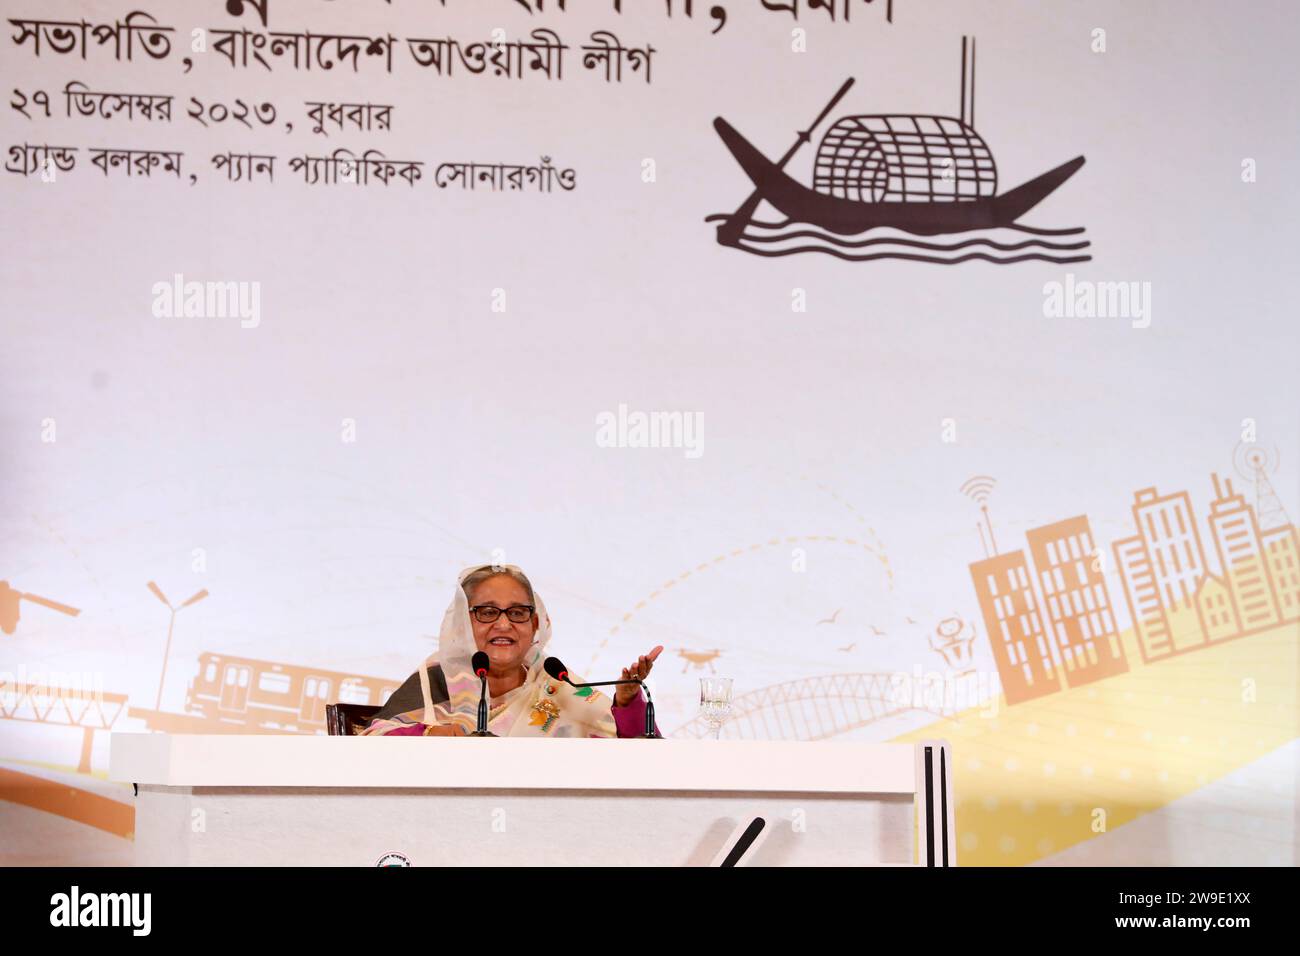 Dhaka, Bangladesh - December 27, 2023: Prime Minister Sheikh Hasina announced the election manifesto of Awami League on the occasion of the 12th Natio Stock Photo